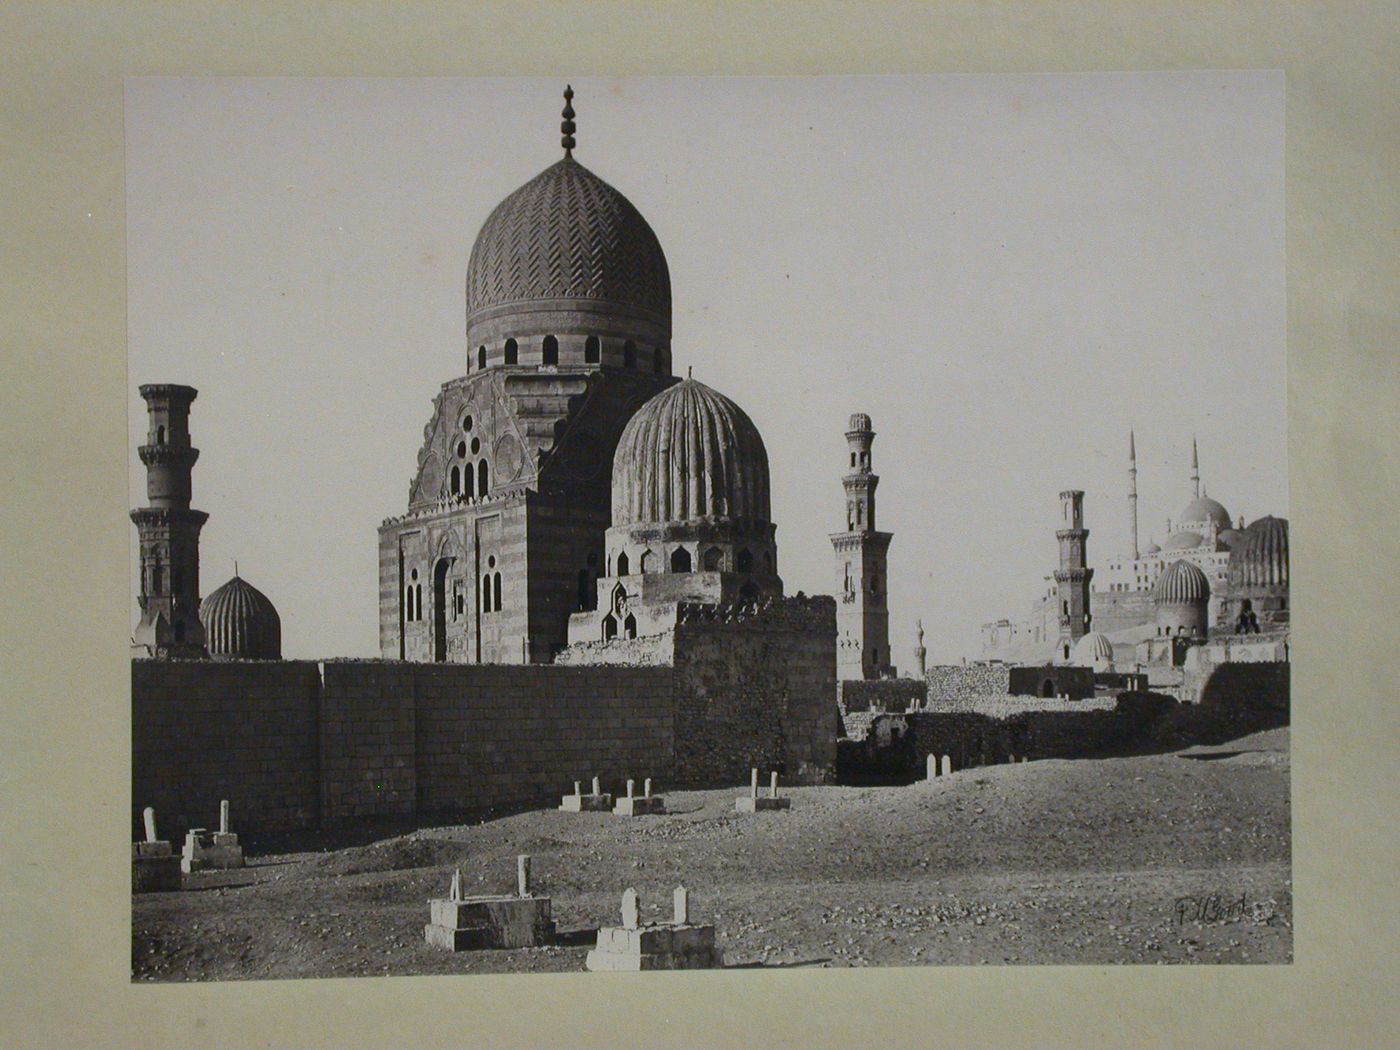 Tomb of Iman Chafey, southern cemetery of the Mamluks, Cairo, Egypt